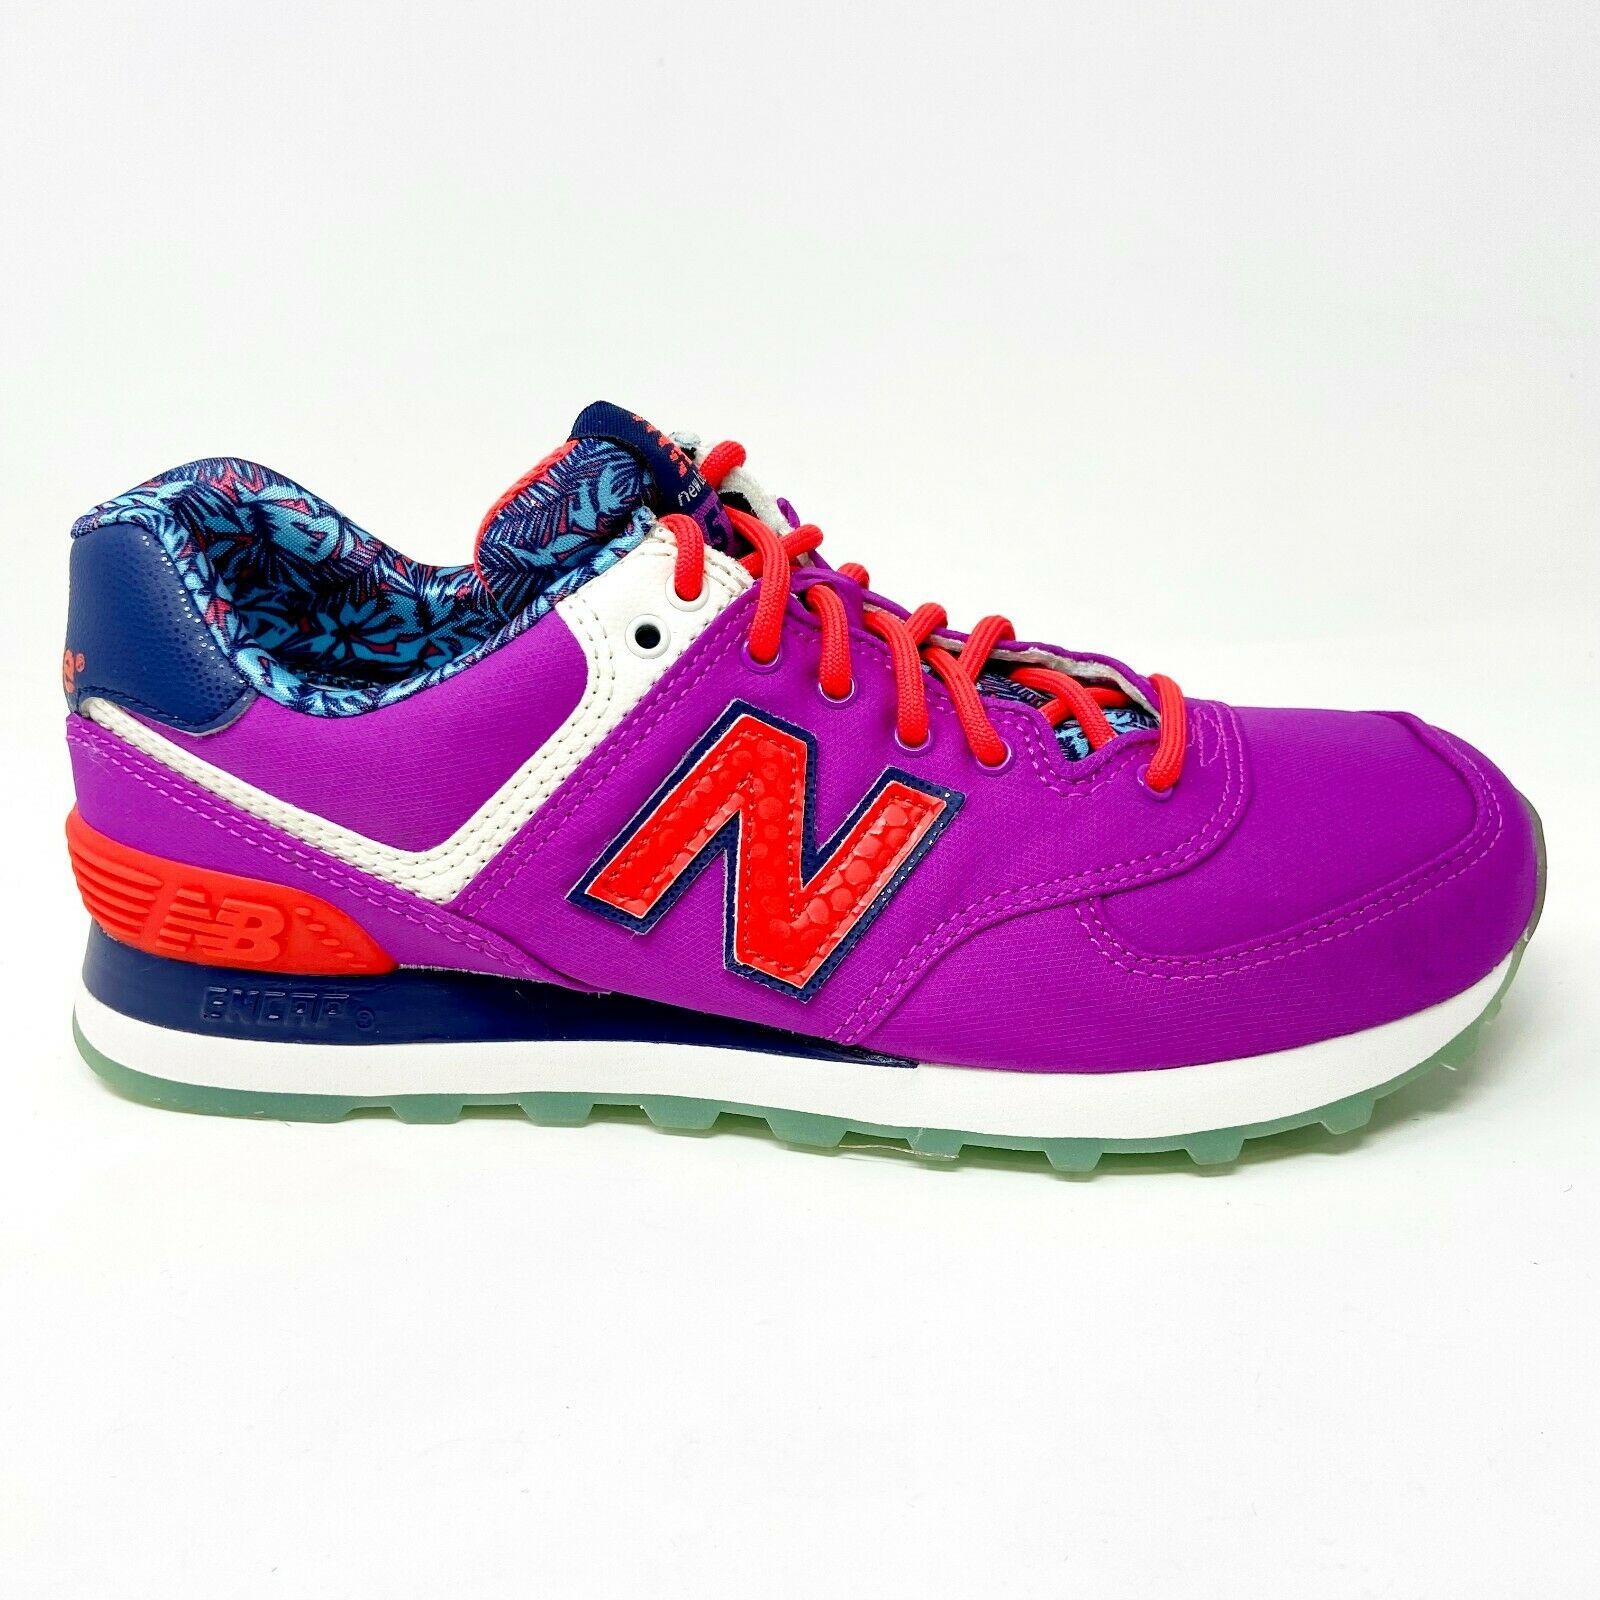 New Balance 574 Classic Luau Voltage Violet Womens Casual Sneakers WL574ILB